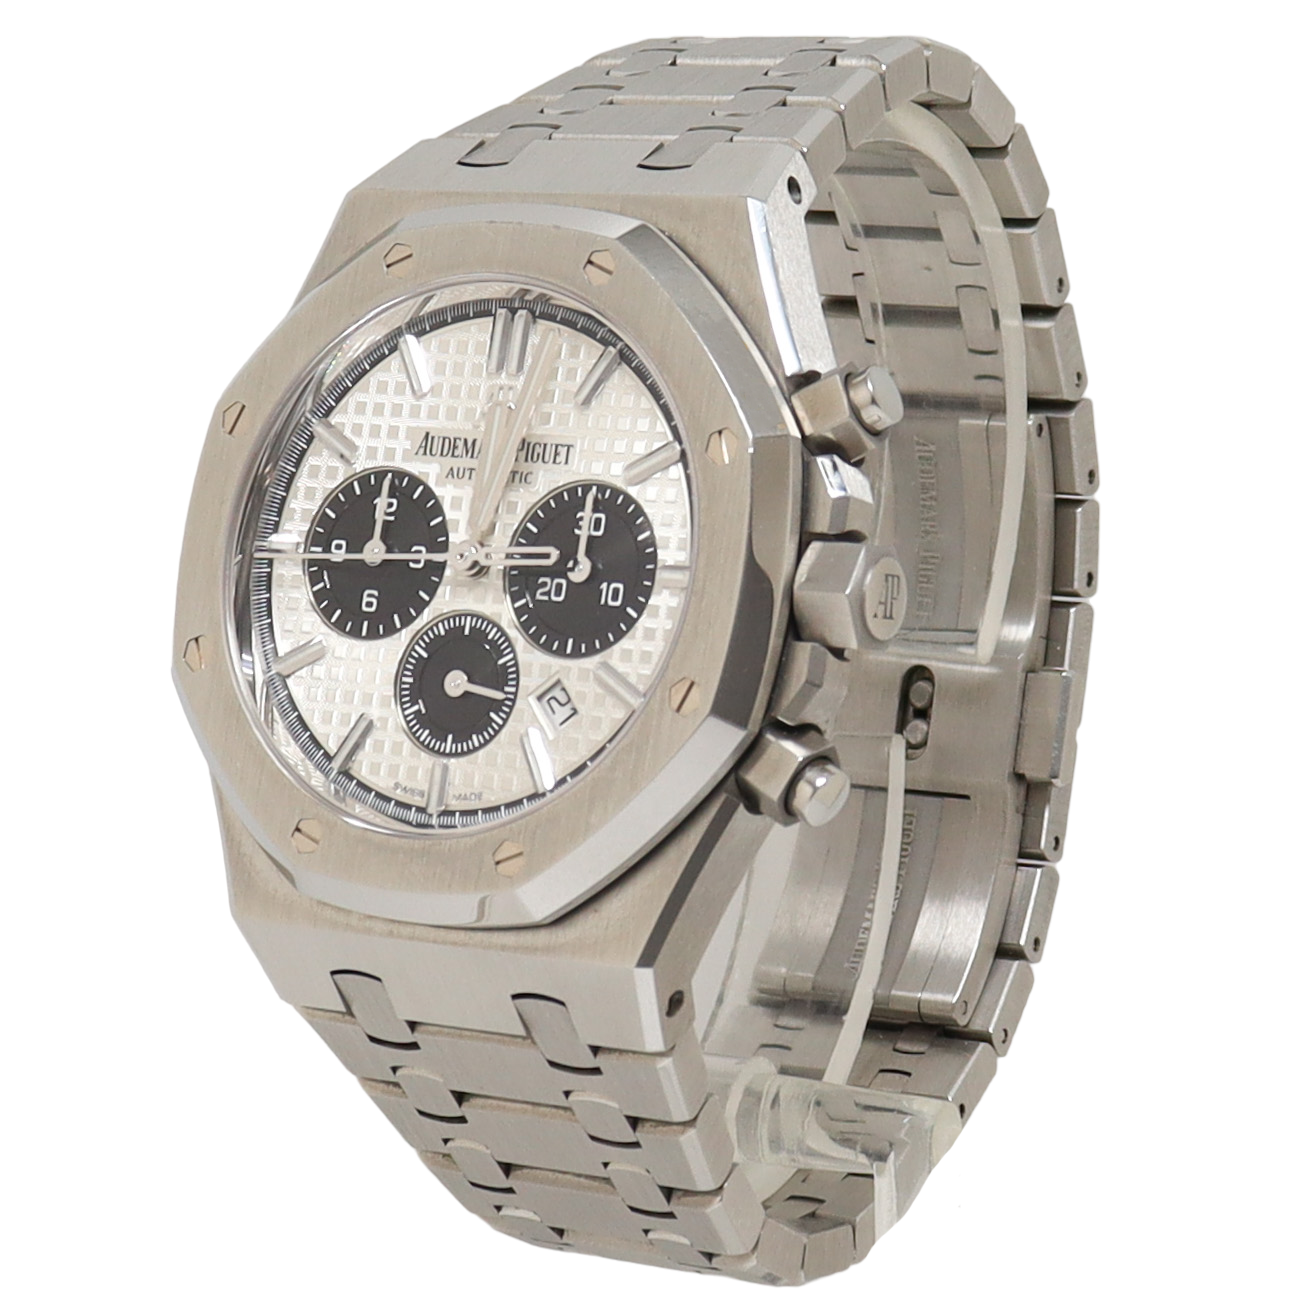 Load image into Gallery viewer, Audemars Piguet Royal Oak Stainless Steel 41mm White Chronograph Dial Watch Reference#: 26331ST.OO.1220ST.03 - Happy Jewelers Fine Jewelry Lifetime Warranty
